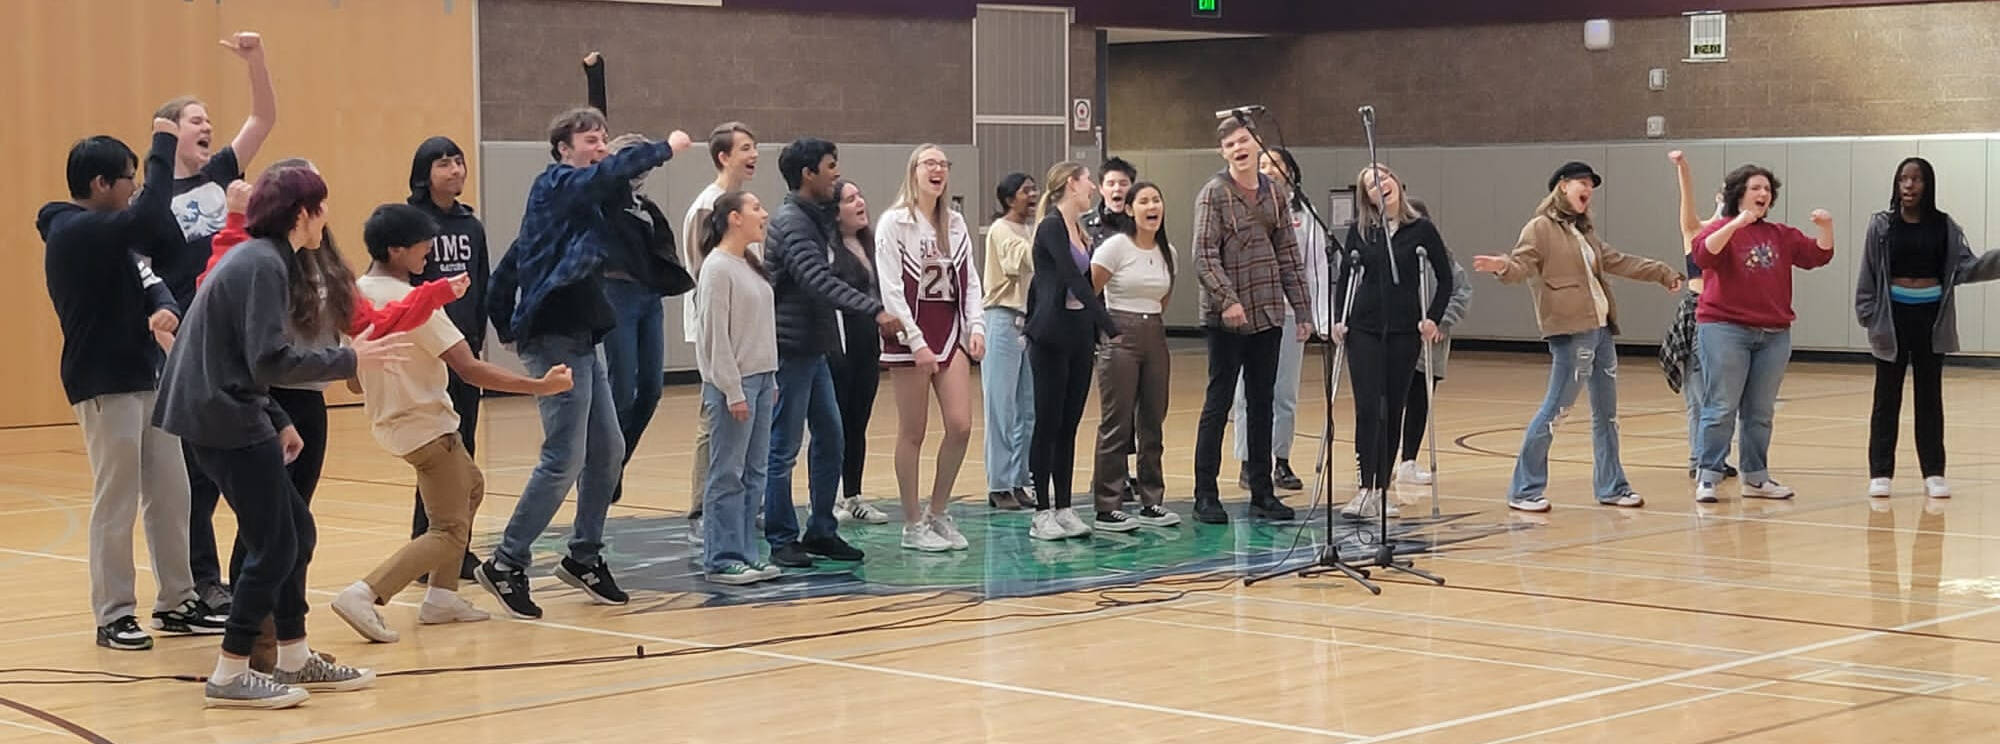 Mercer Island High School drama students performed a scene/song for Islander Middle School students on Oct. 27. Photo courtesy of the Mercer Island High School Drama Department